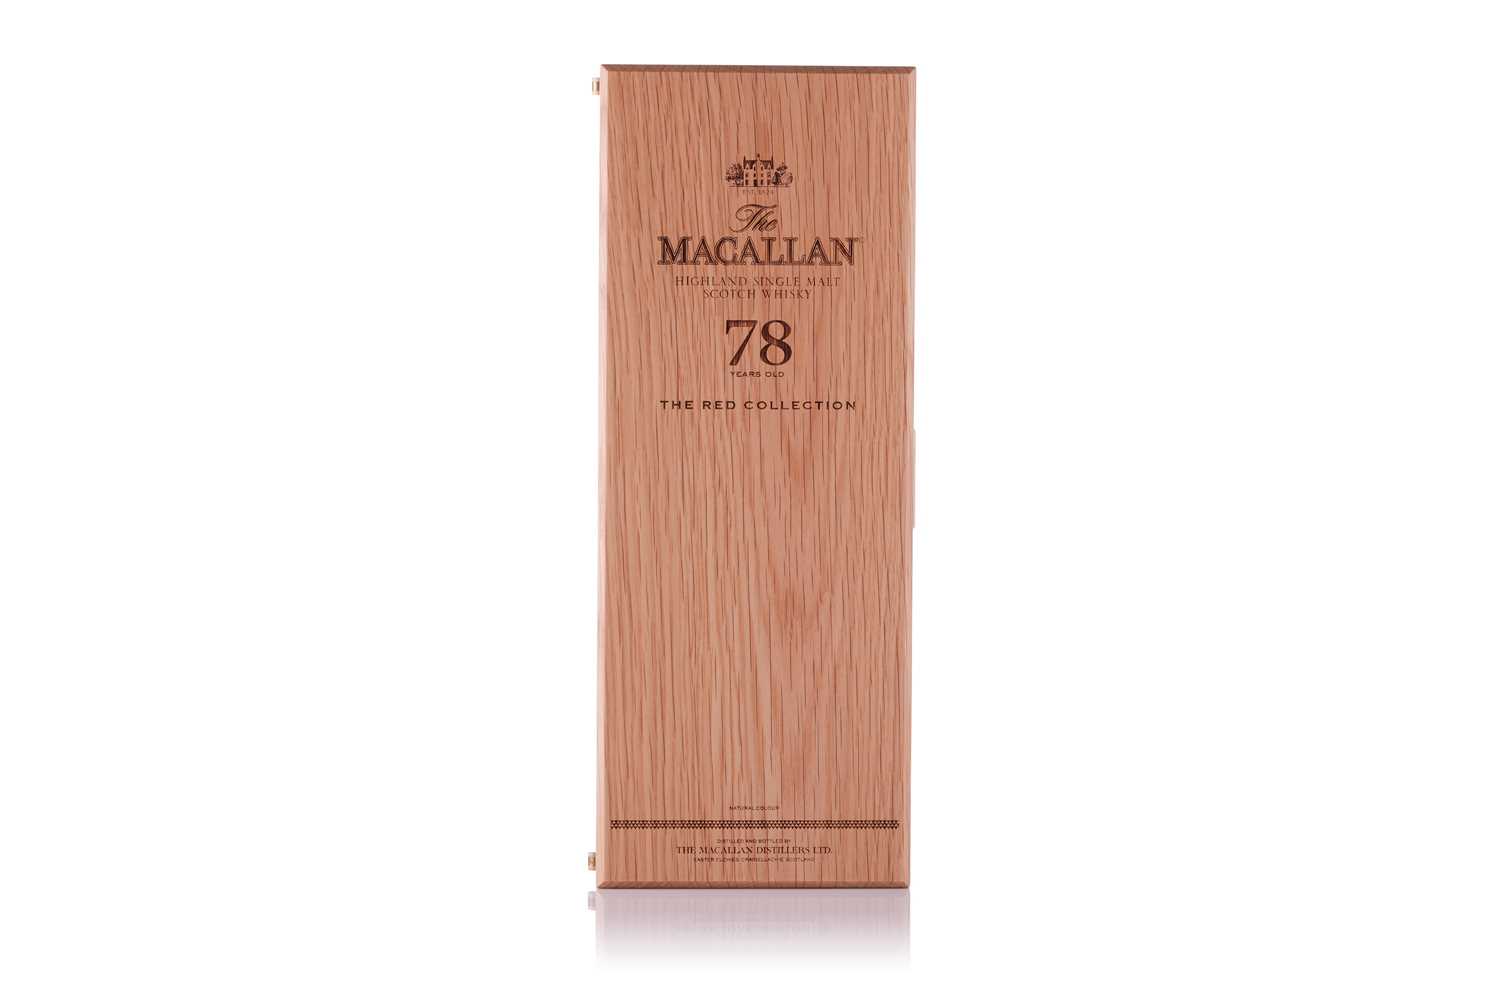 The Macallan 78 year old, The Red Collection. Distilled and bottled by The Macallan Distillery Ltd - Image 6 of 13